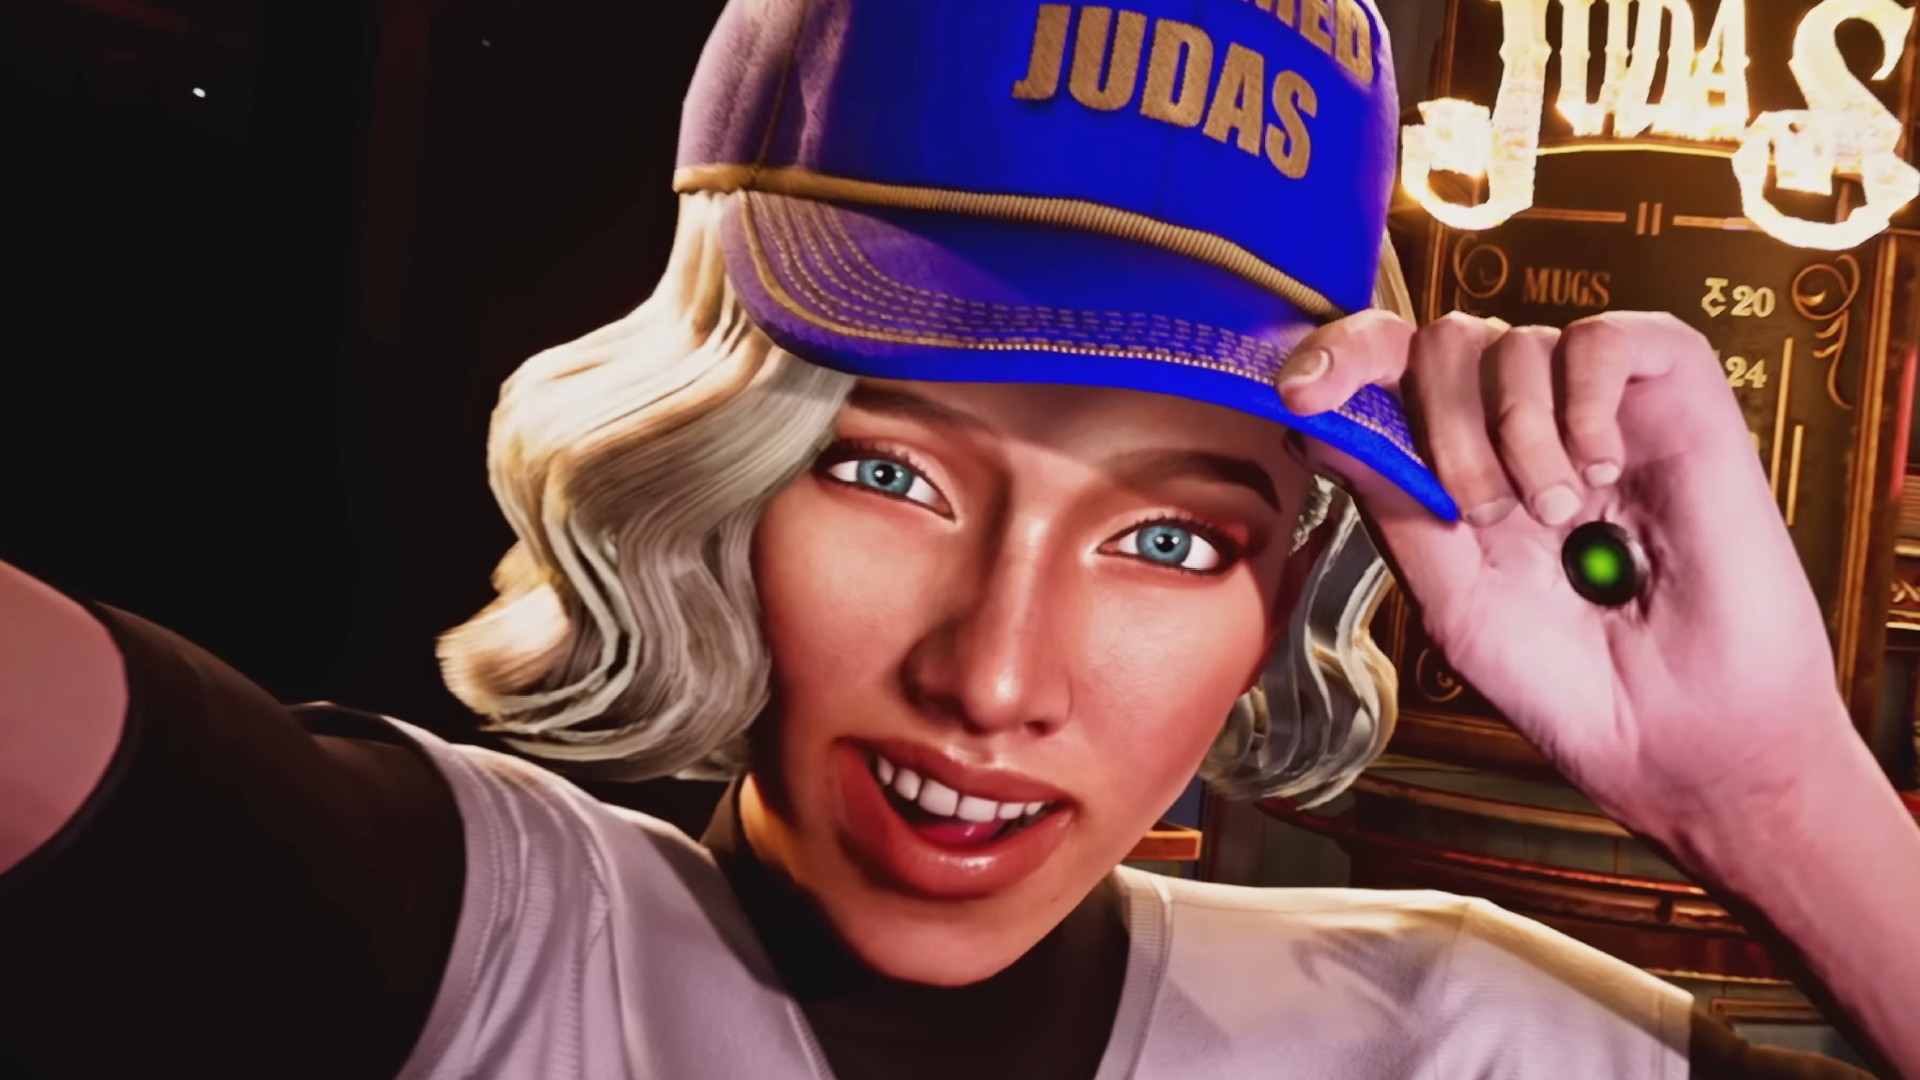 Judas release date window, trailers, gameplay, and latest news